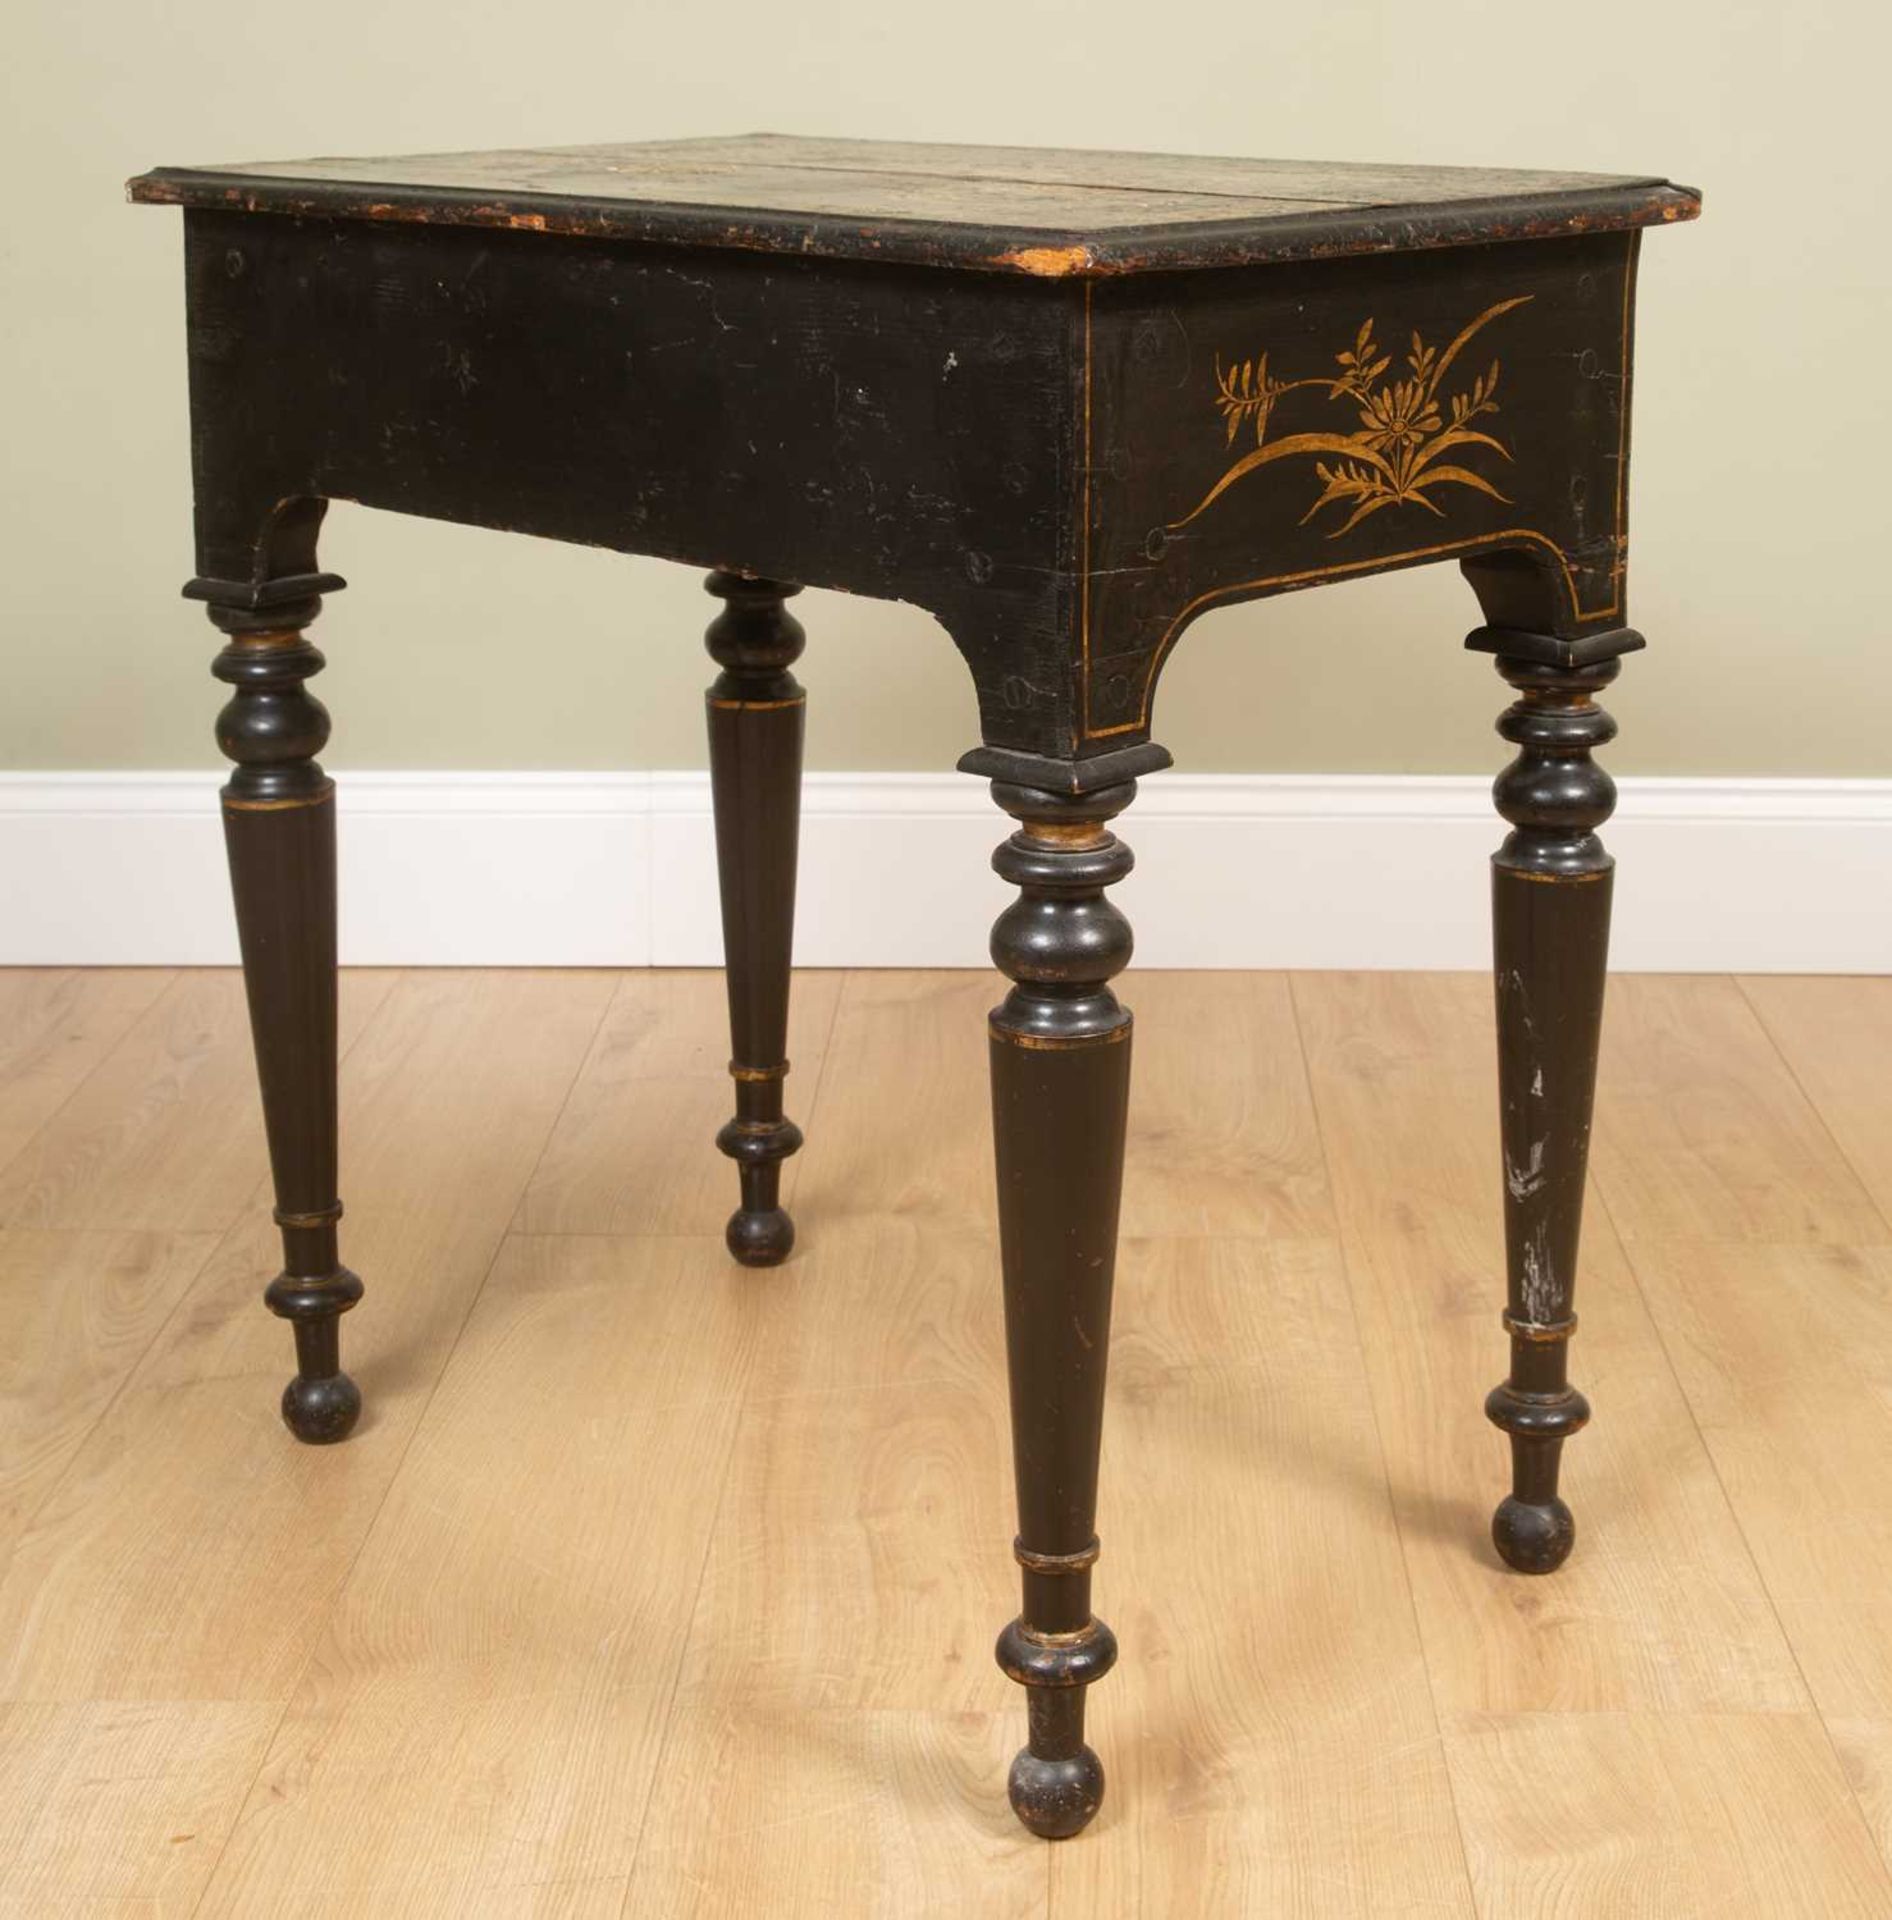 An early 18th century and later black lacquered chinoiserie decorated lowboy, with village and - Image 5 of 7